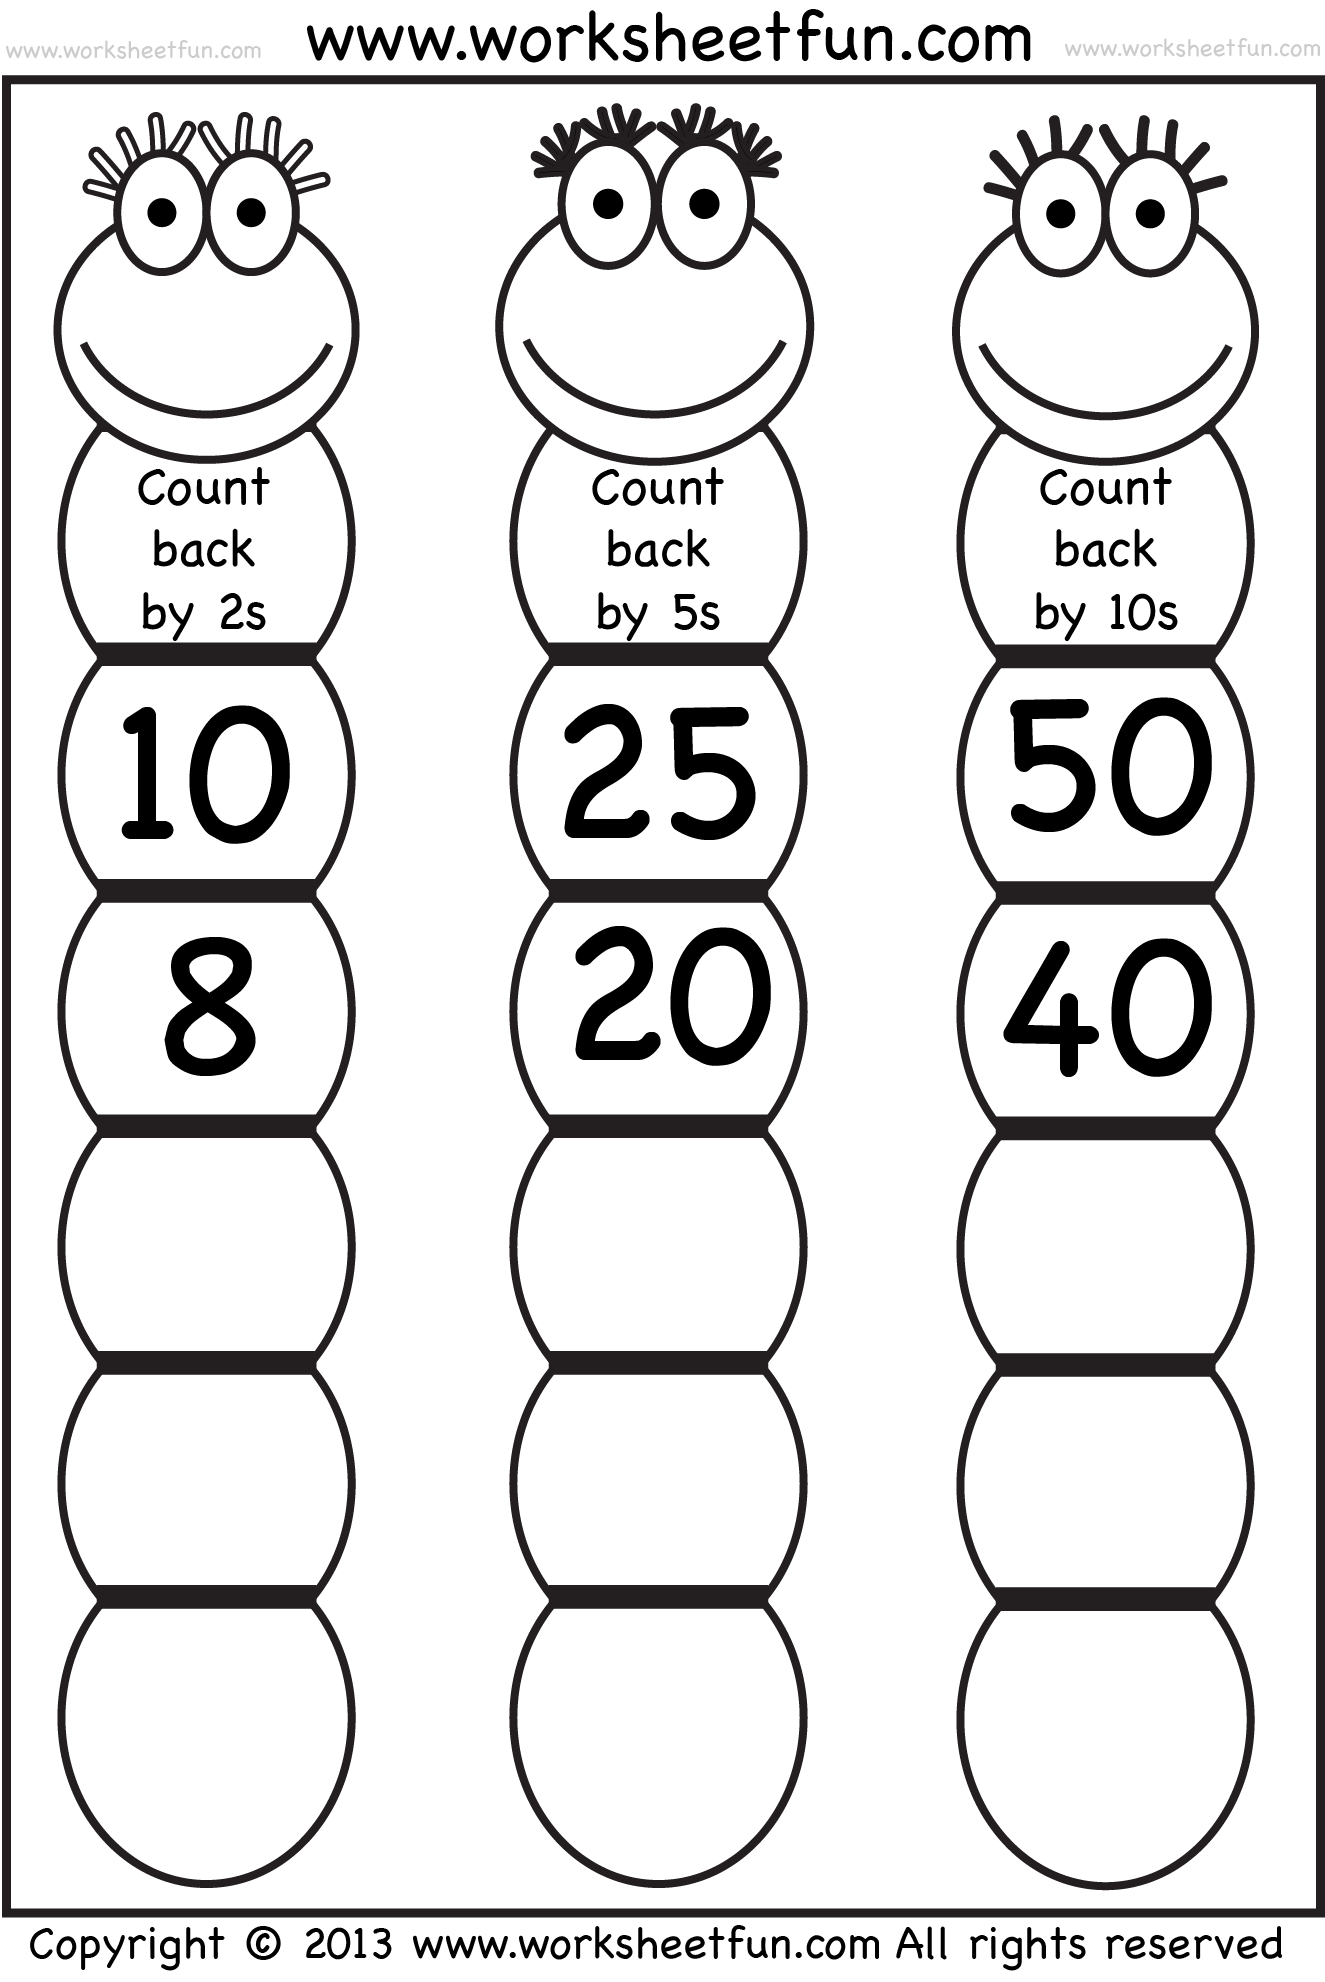 Skip Counting – Count Back by 11, 11 and 11 – Worksheet / FREE Throughout Counting By 5s Worksheet